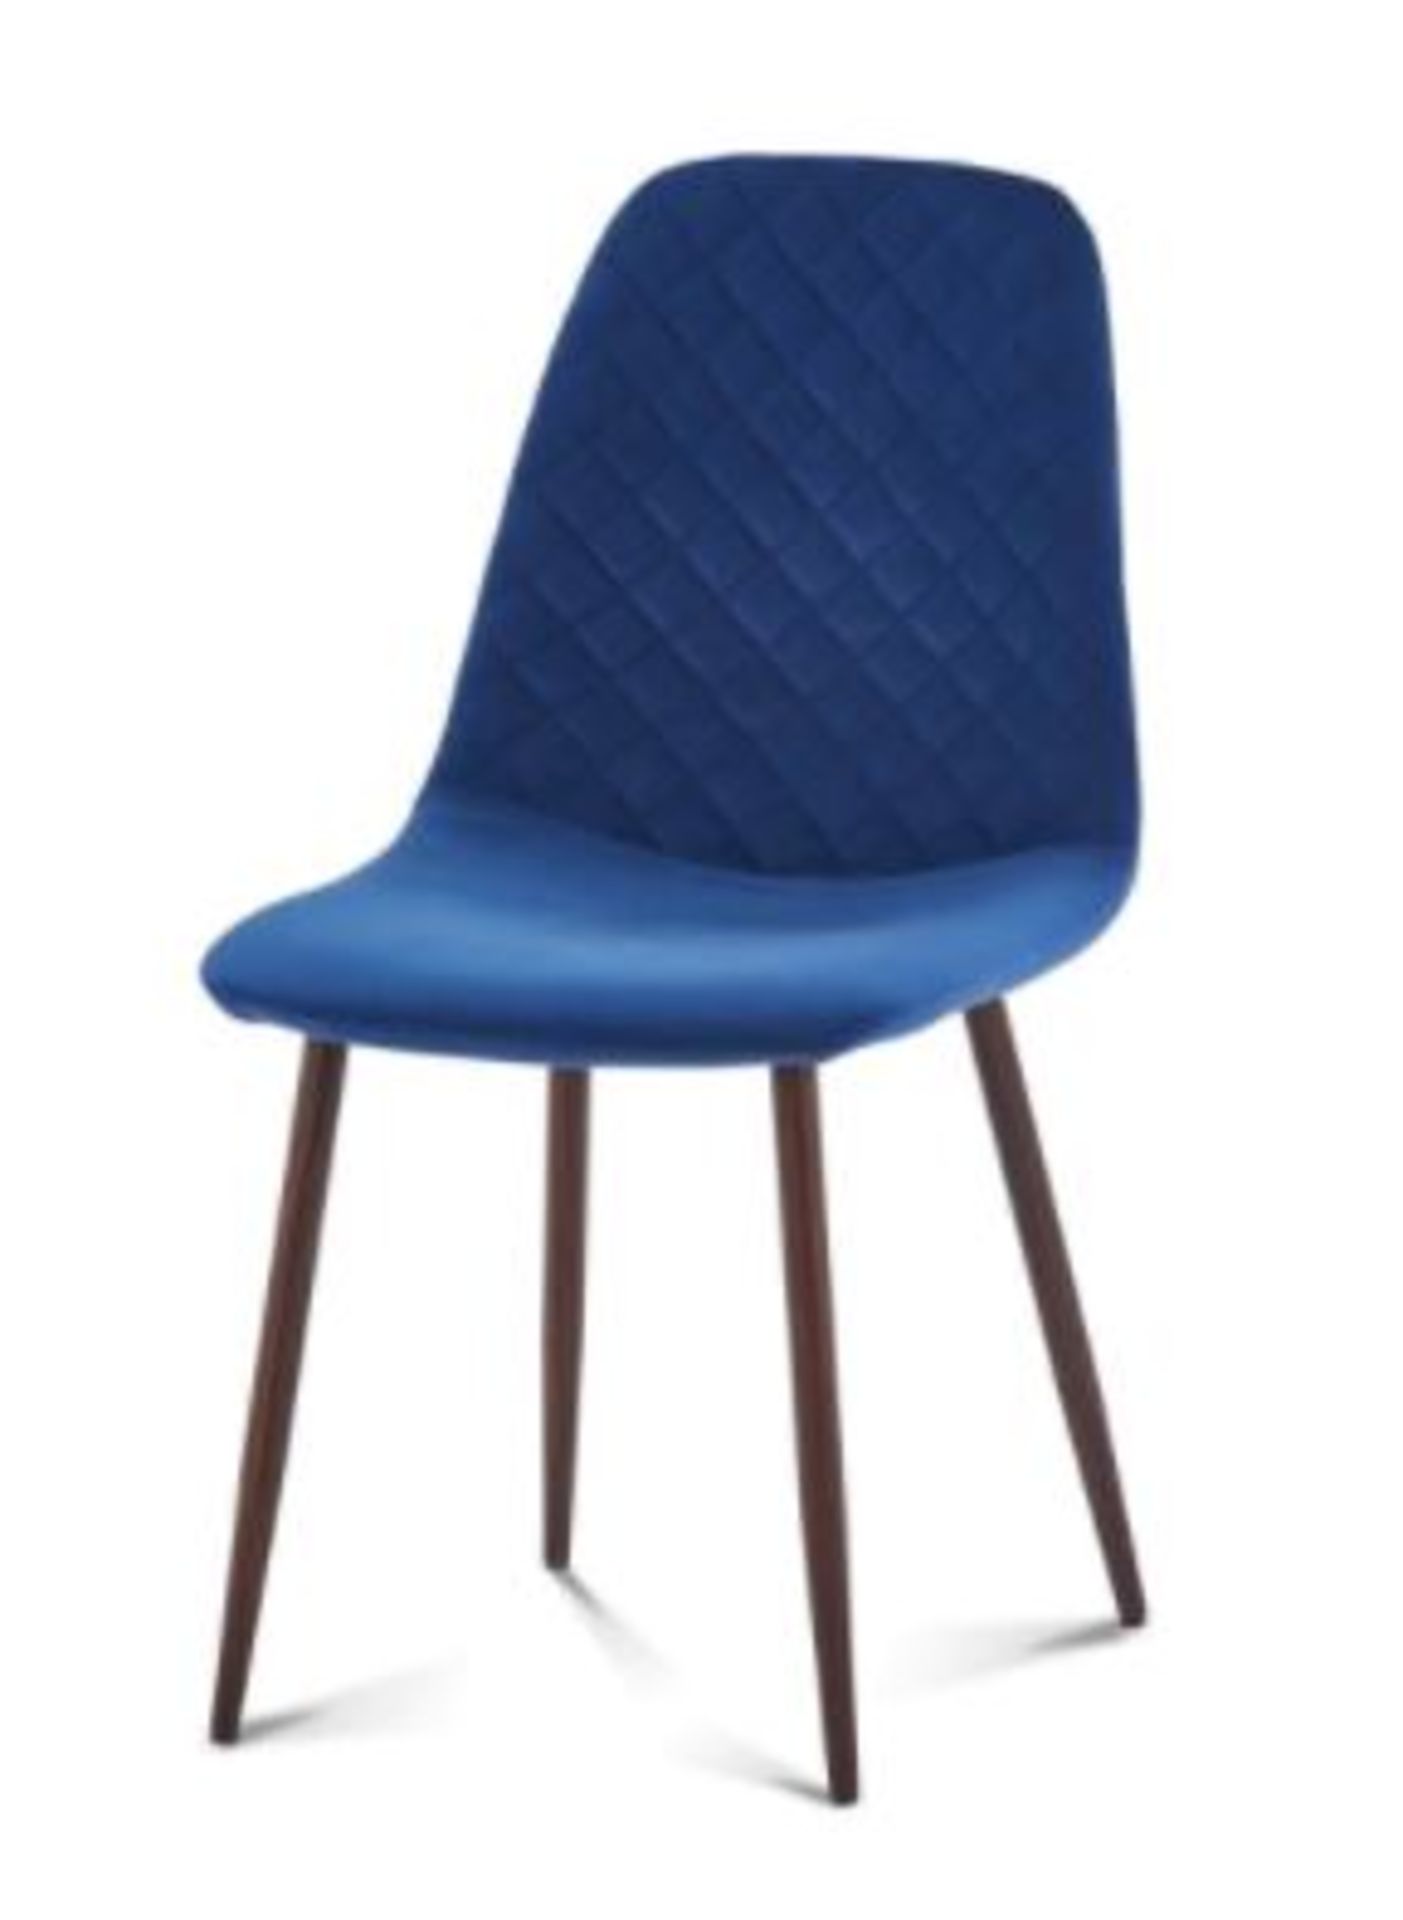 (R10H) 2 X Perth Navy Velvet Chair. Walnut Effect Metal Frame With Fully Upholstered Seat. (H84xW53